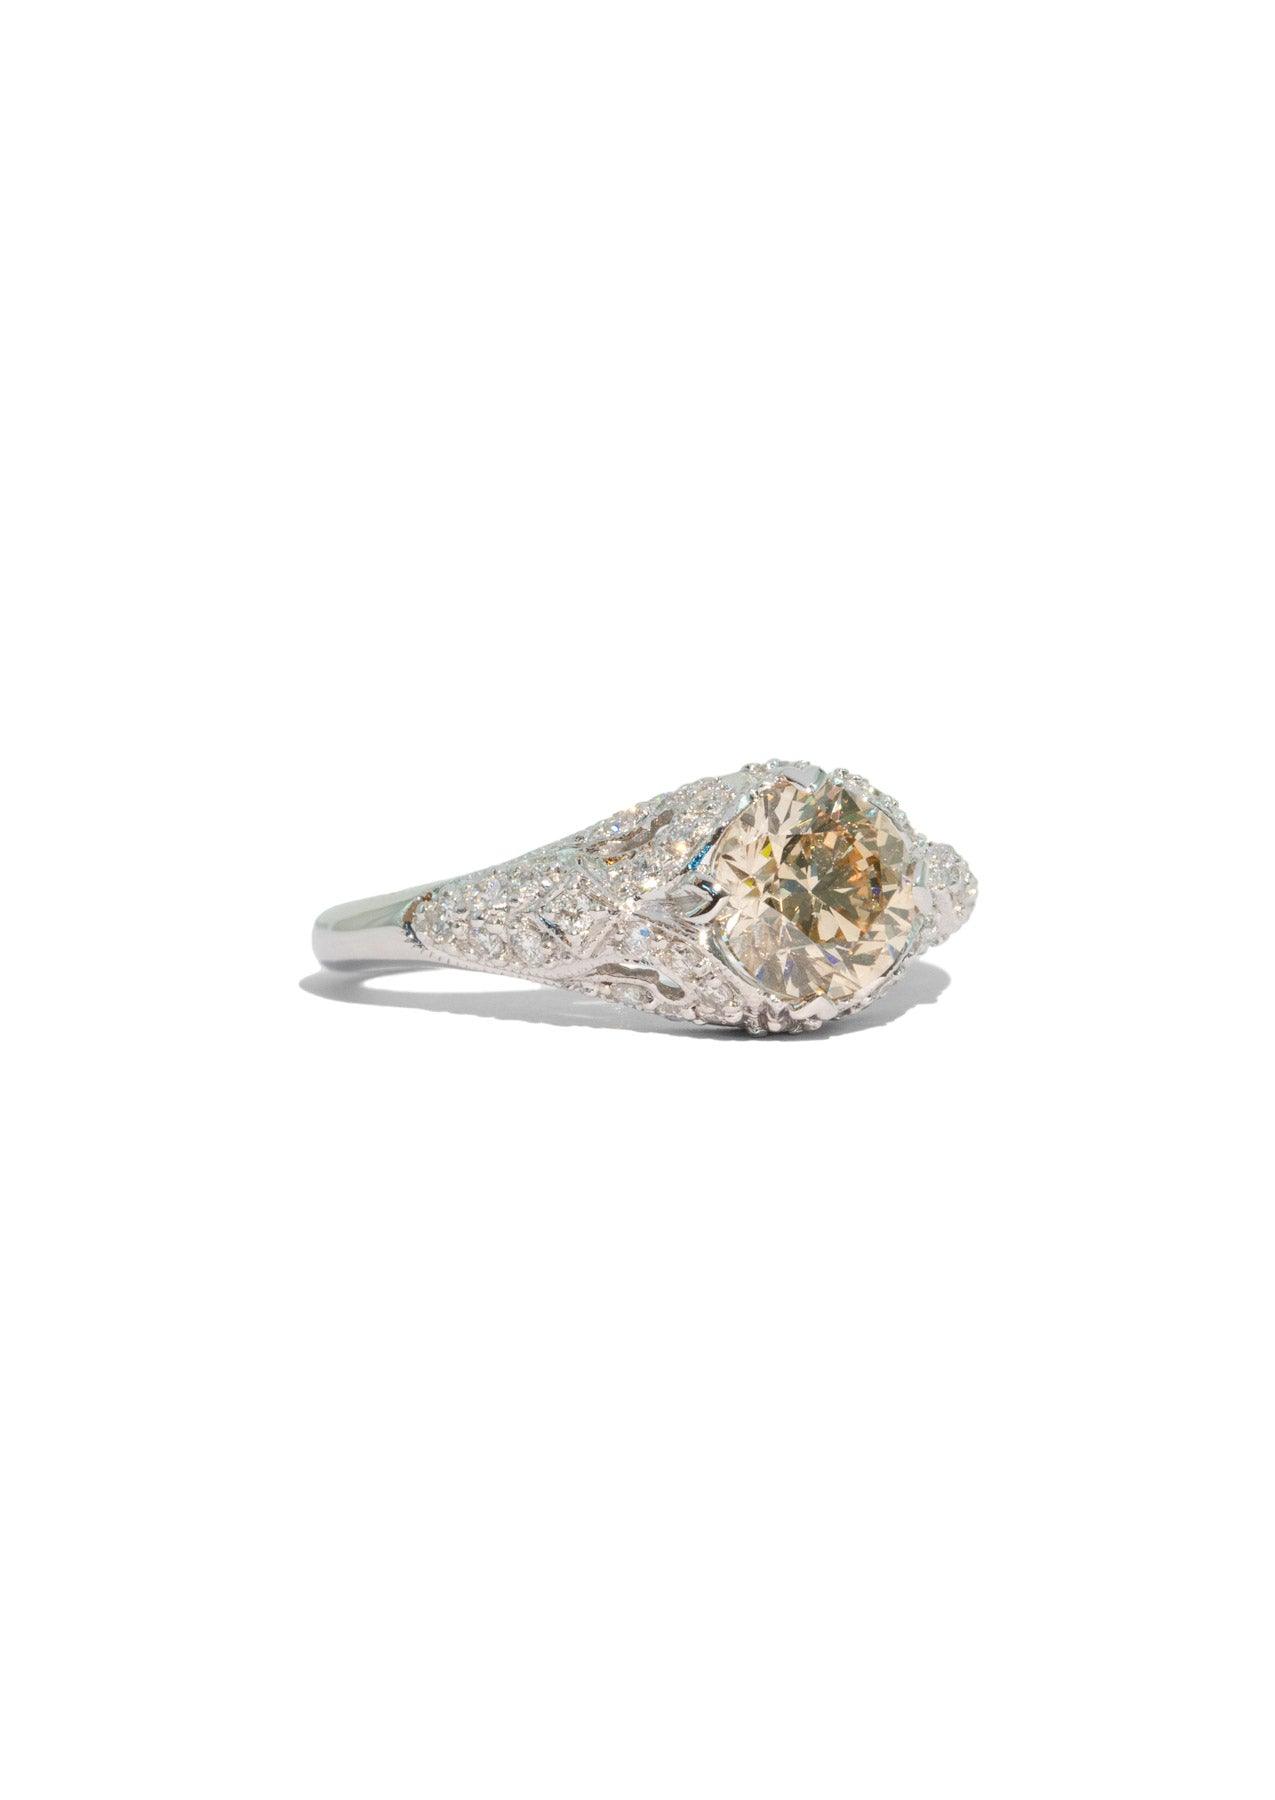 The Arden 1.66ct Champagne Diamond Ring